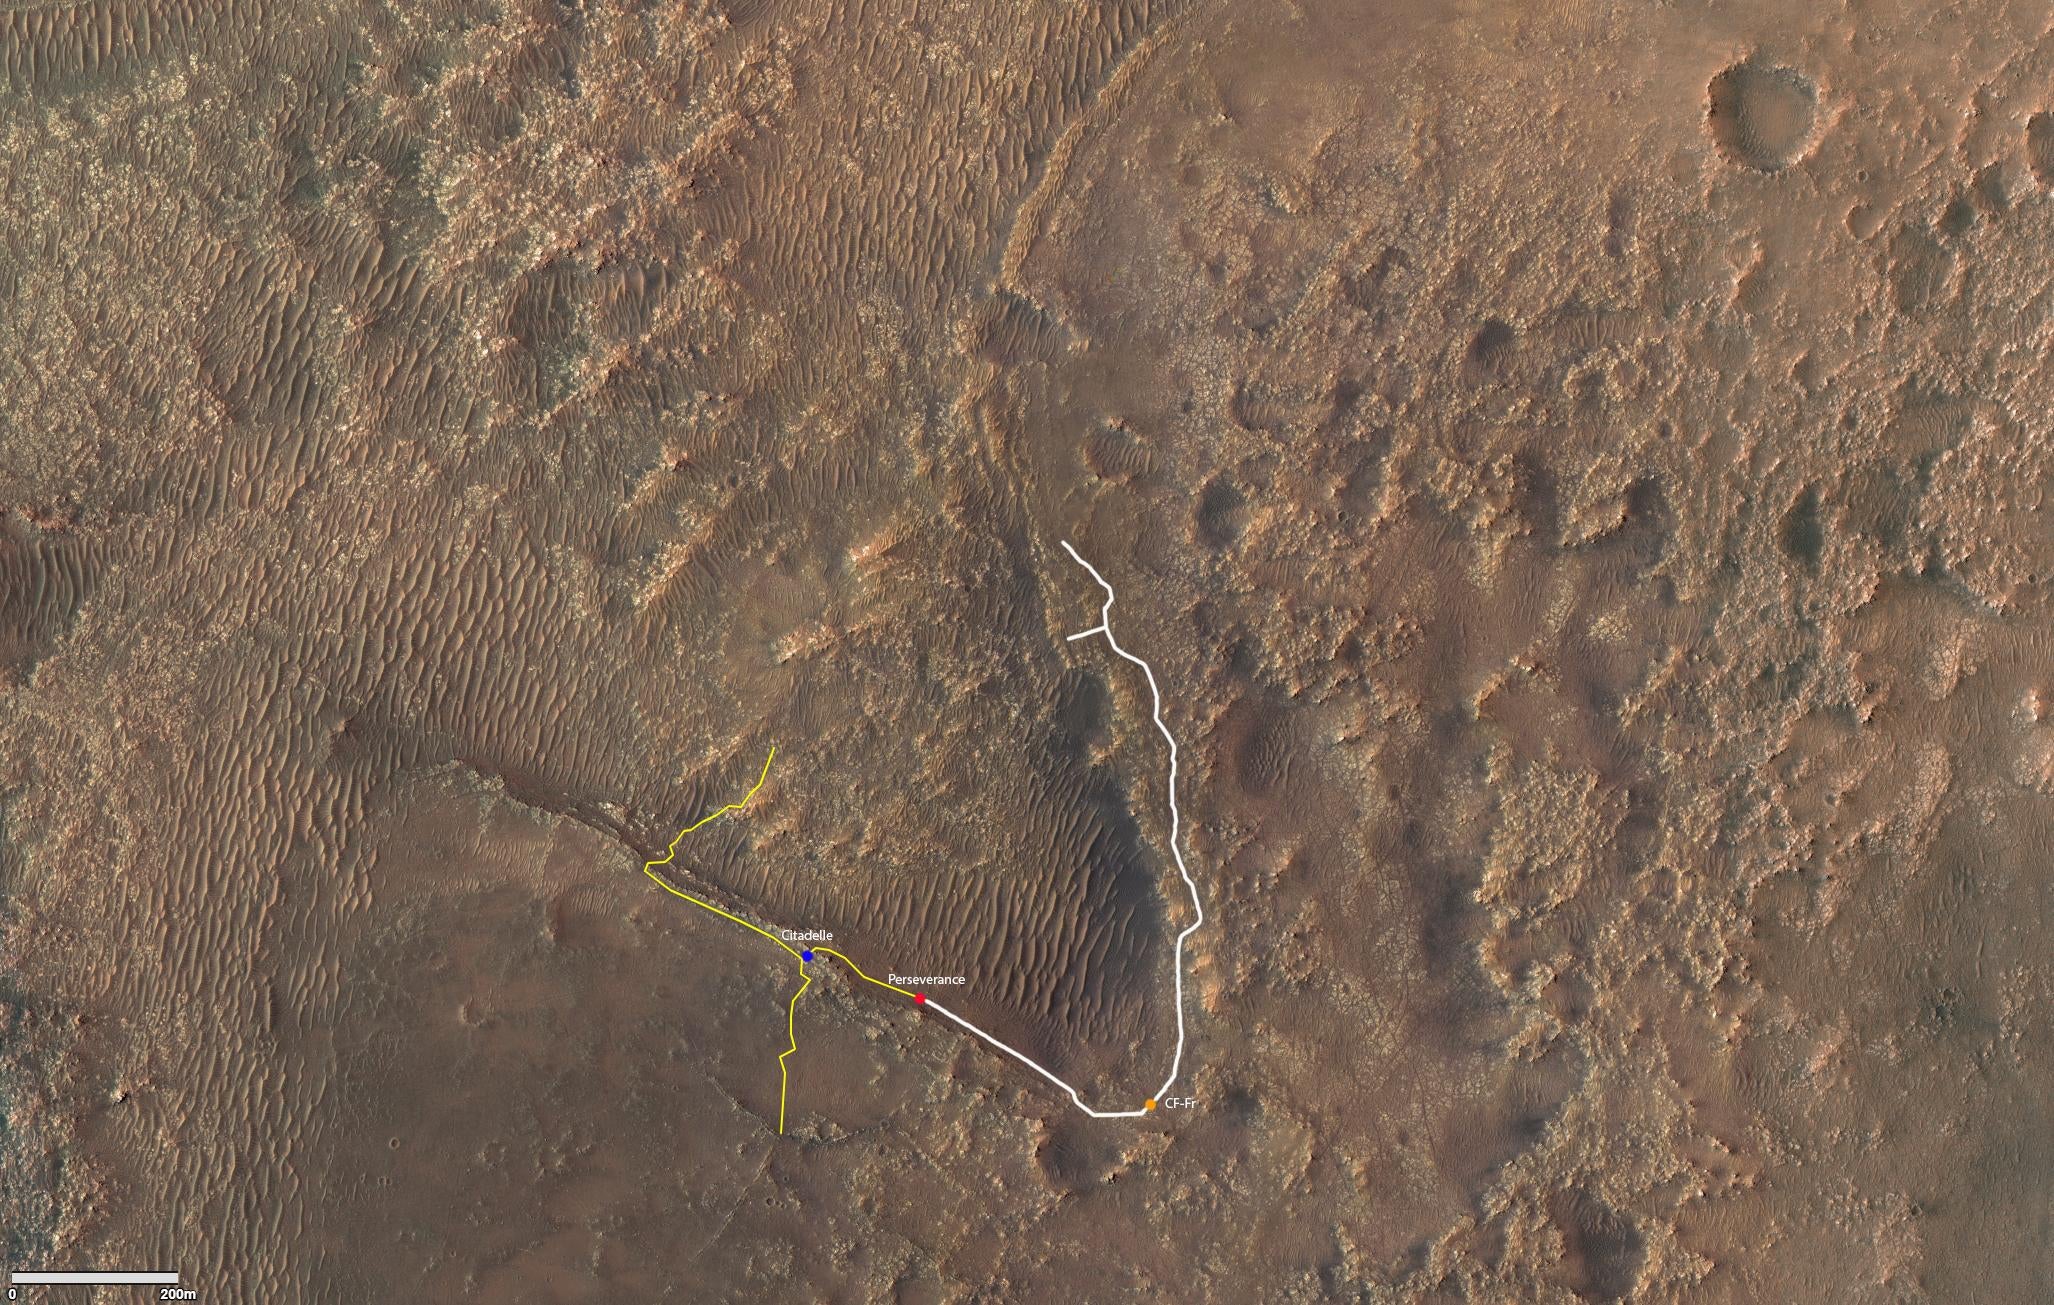 An annotated image showing Perseverance's trek so far on Mars and its future paths. Citadelle is marked by the blue dot. (Image: NASA/JPL-Caltech/University of Arizona)